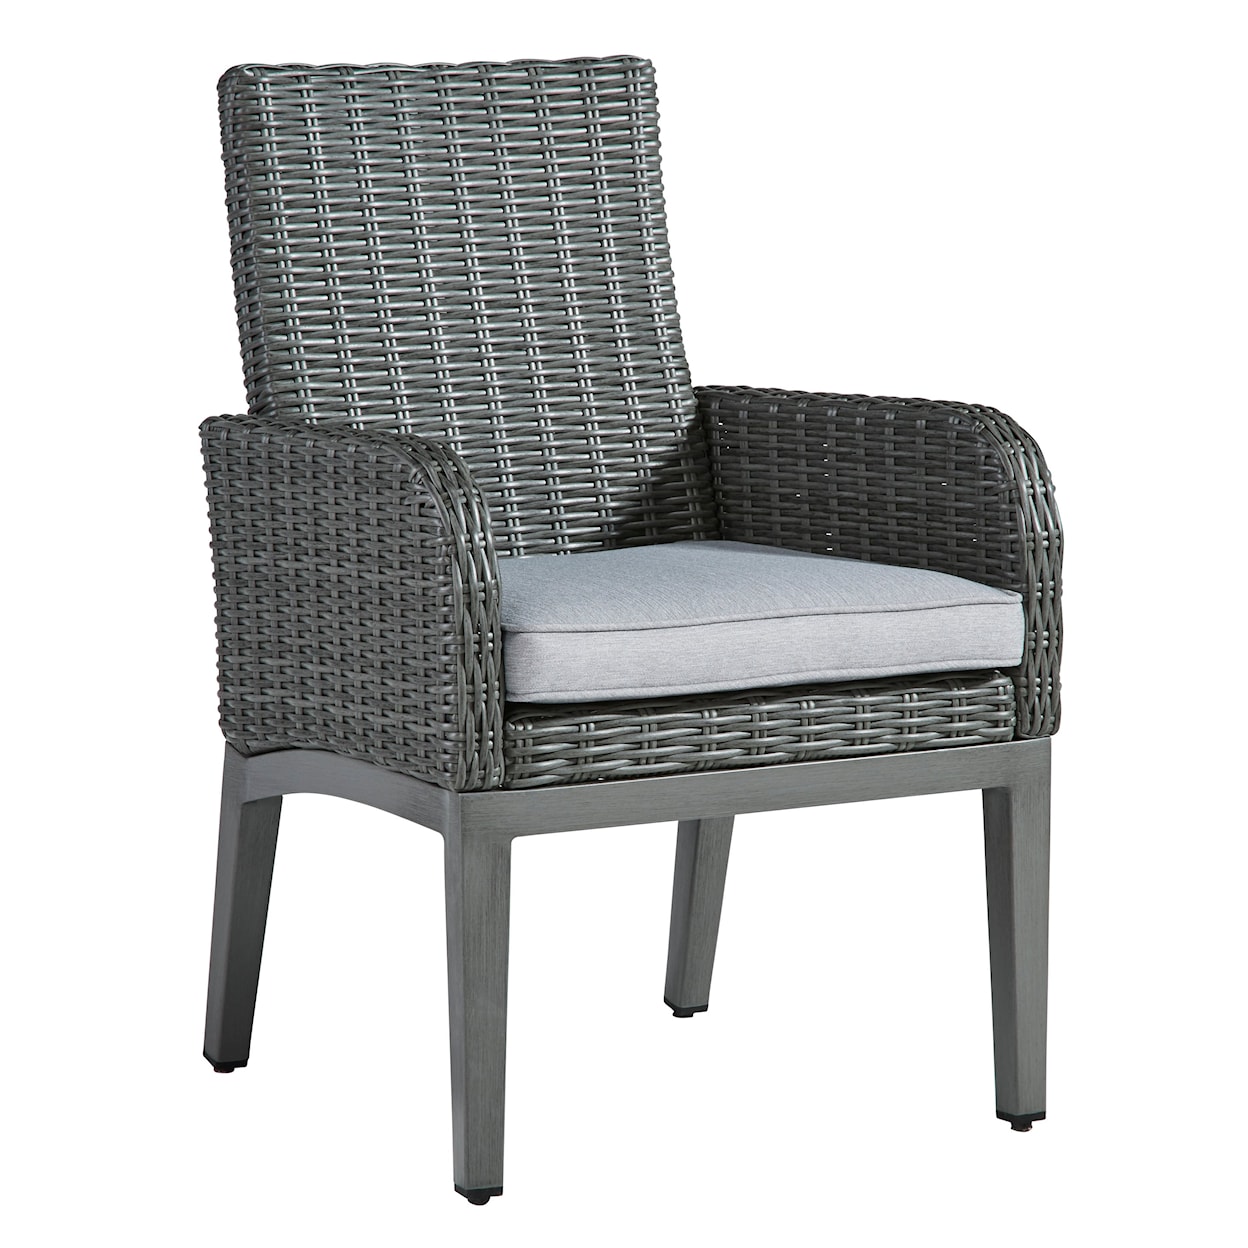 Signature Design by Ashley Elite Park Arm Chair with Cushion (Set of 2)